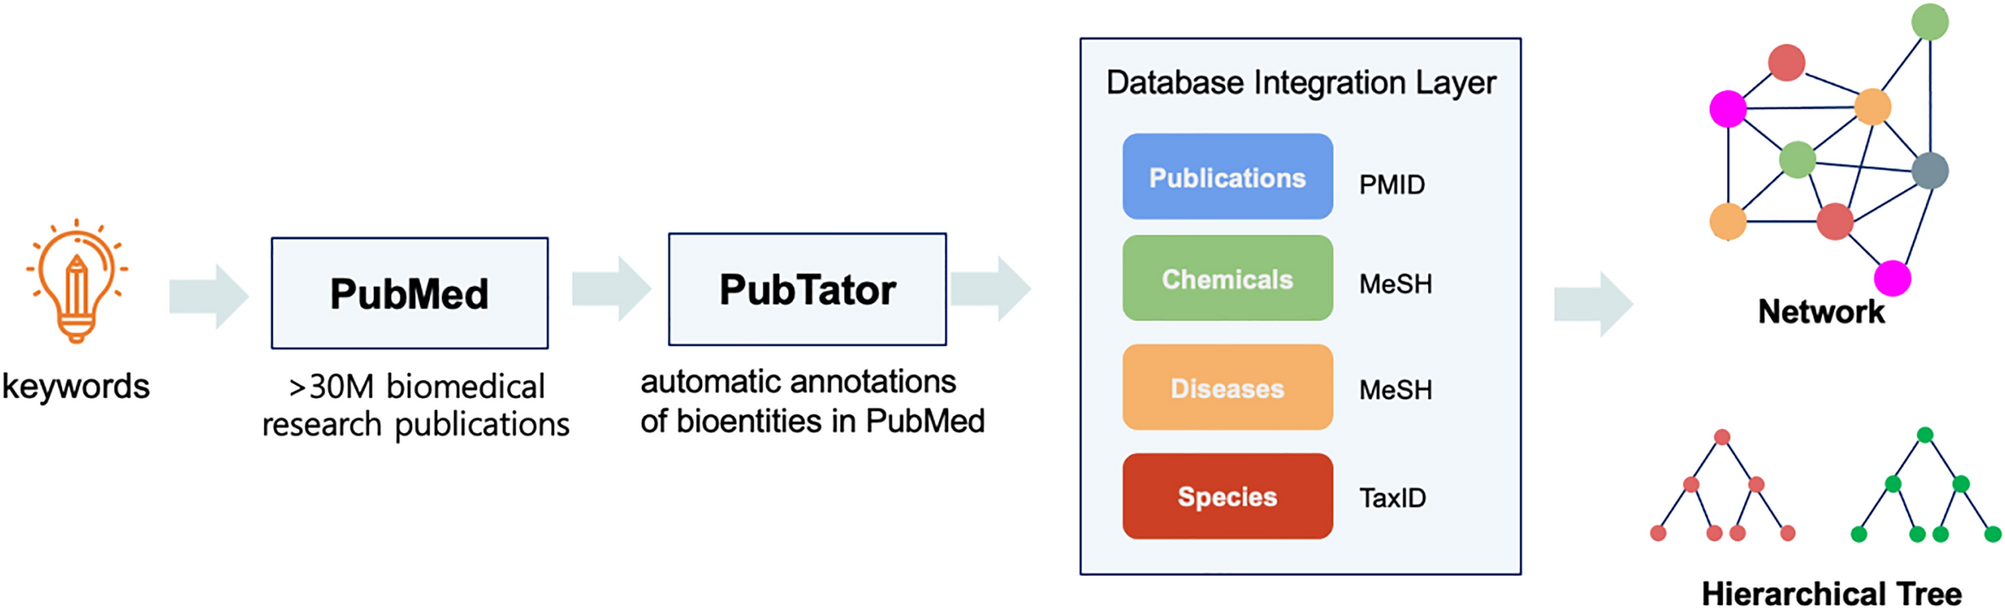 Hierarchical network analysis of co-occurring bioentities in literature |  Scientific Reports